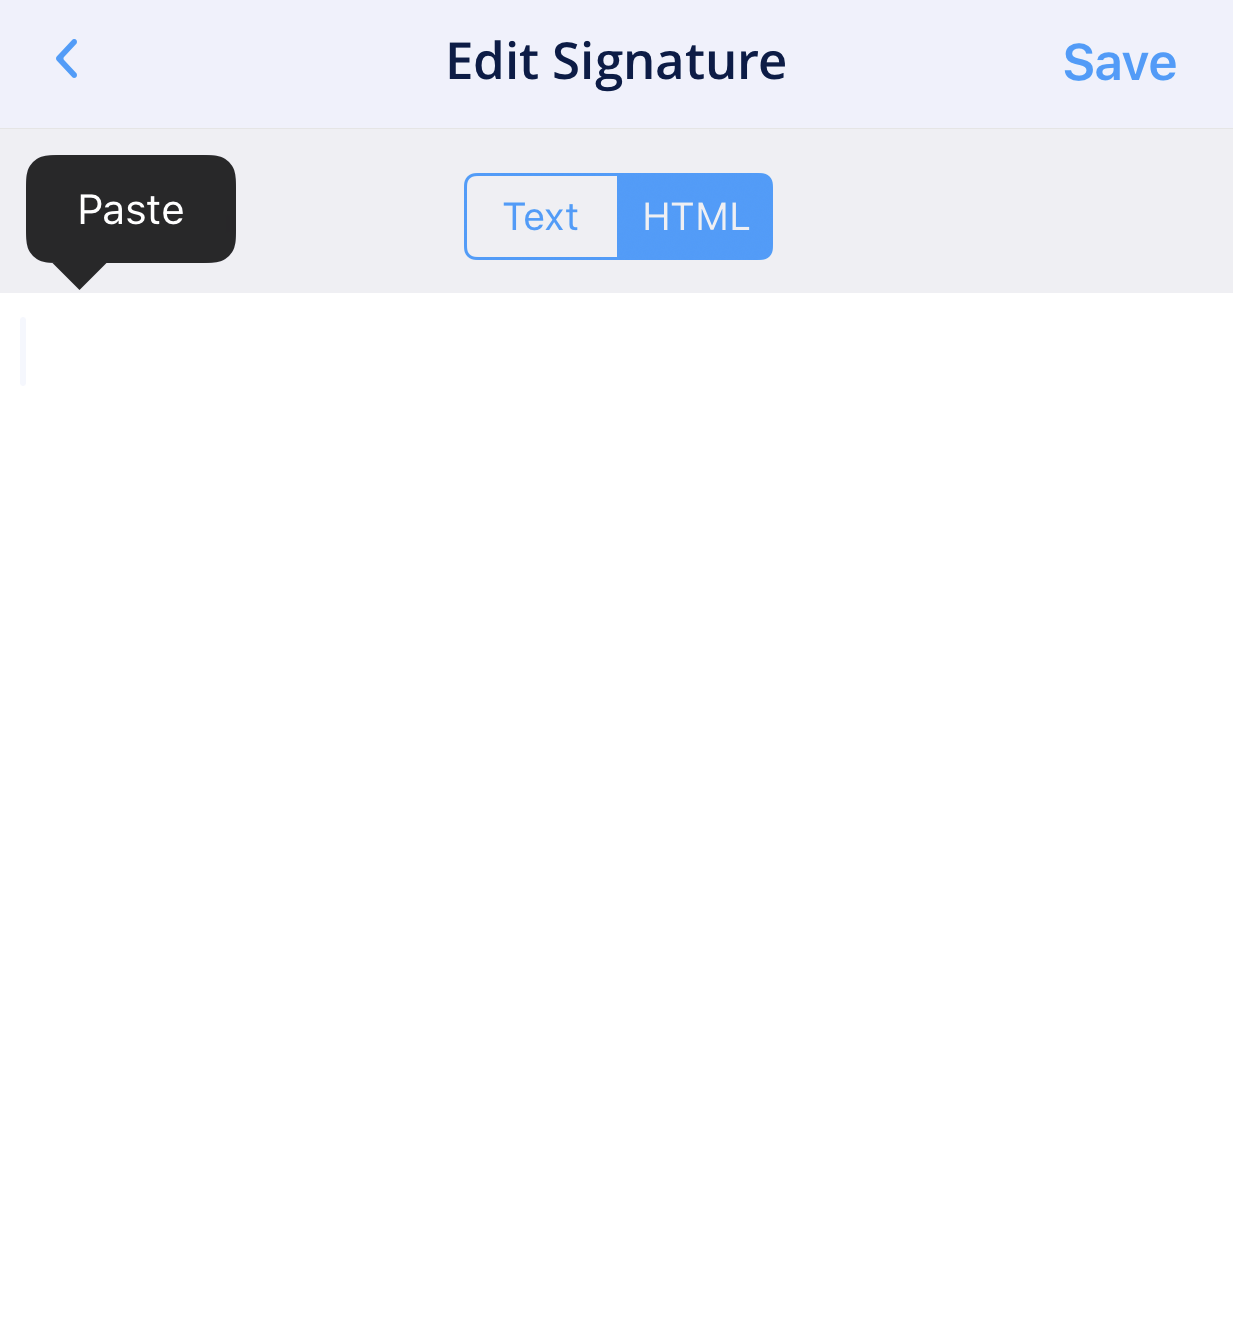 How to edit a signature in Spark